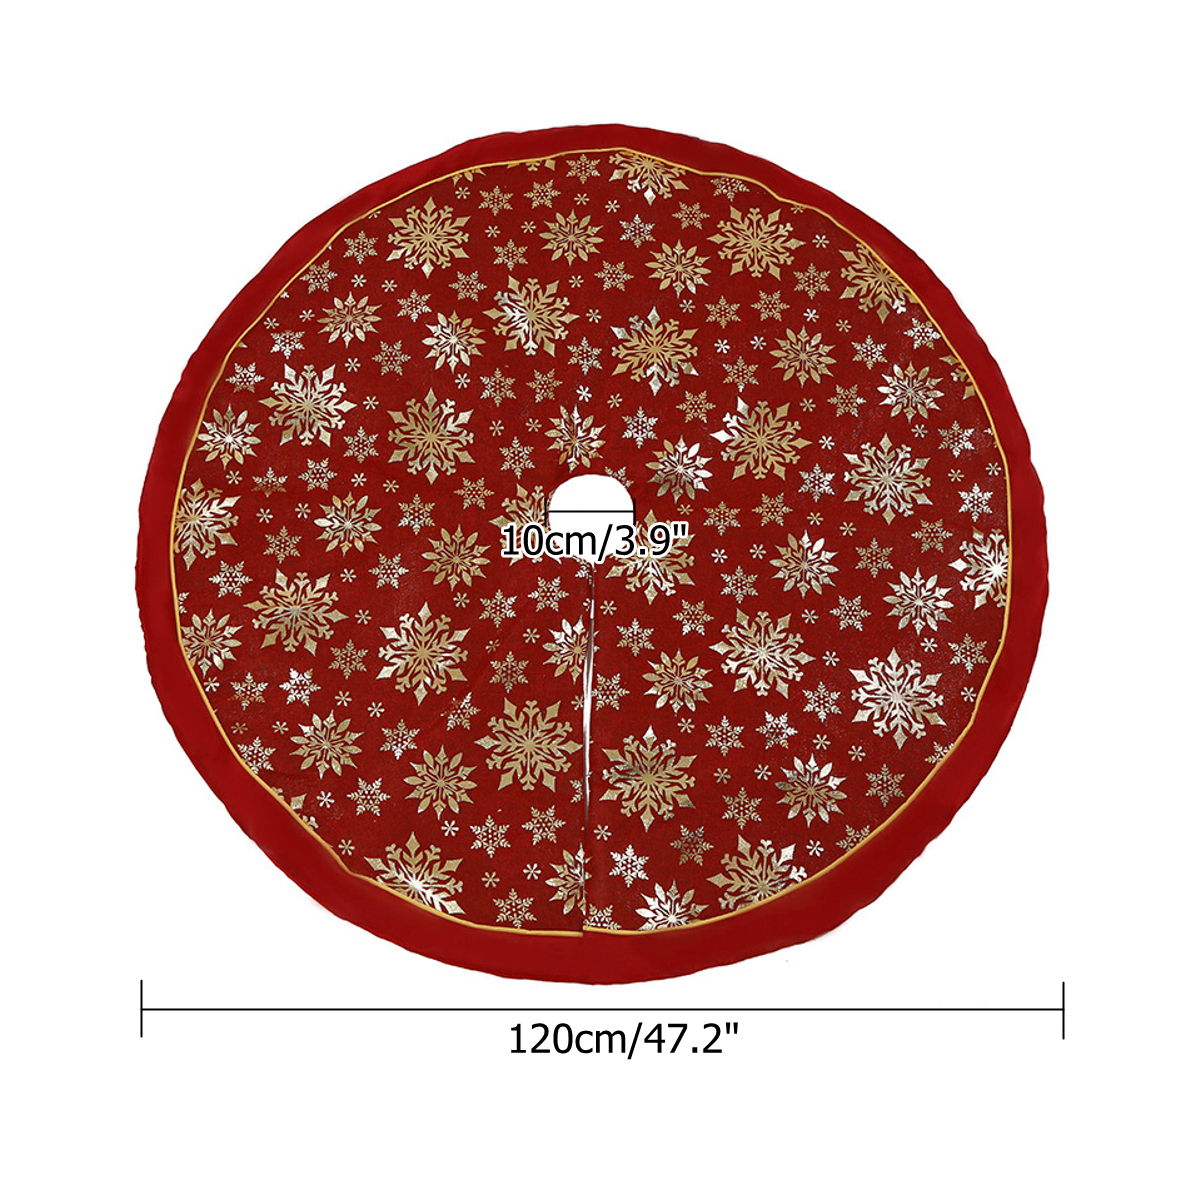 120cm-Stitched-Santa-Christmas-Snowflake-Skir-Tree-Skirt-for-Home-New-Year-2020-Christmas-Fancy-Deco-1770958-5